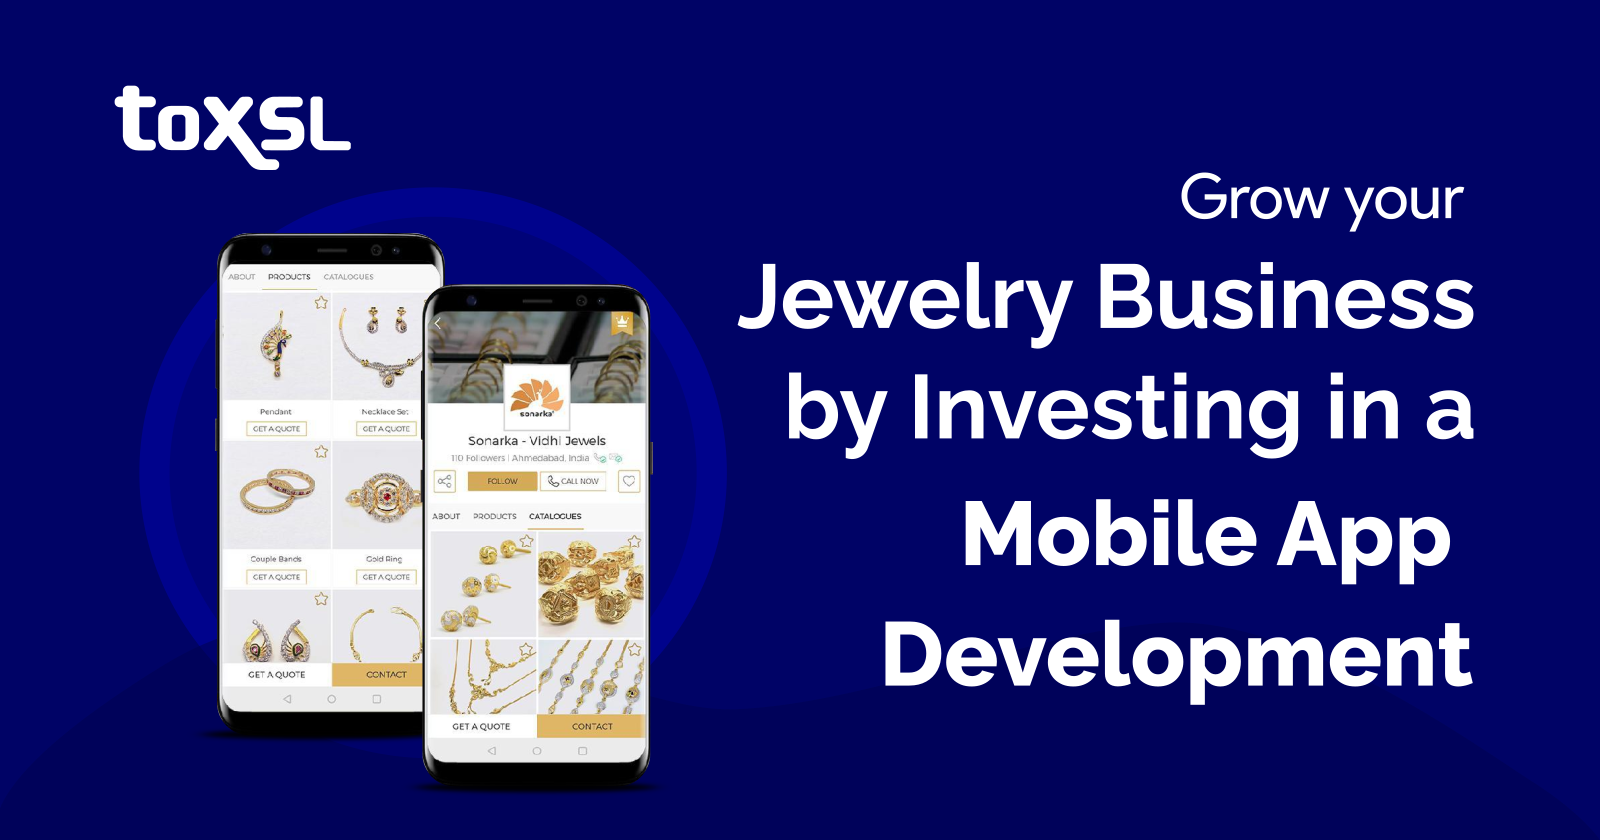 Grow your Jewelry Business by Investing in a Mobile App Development